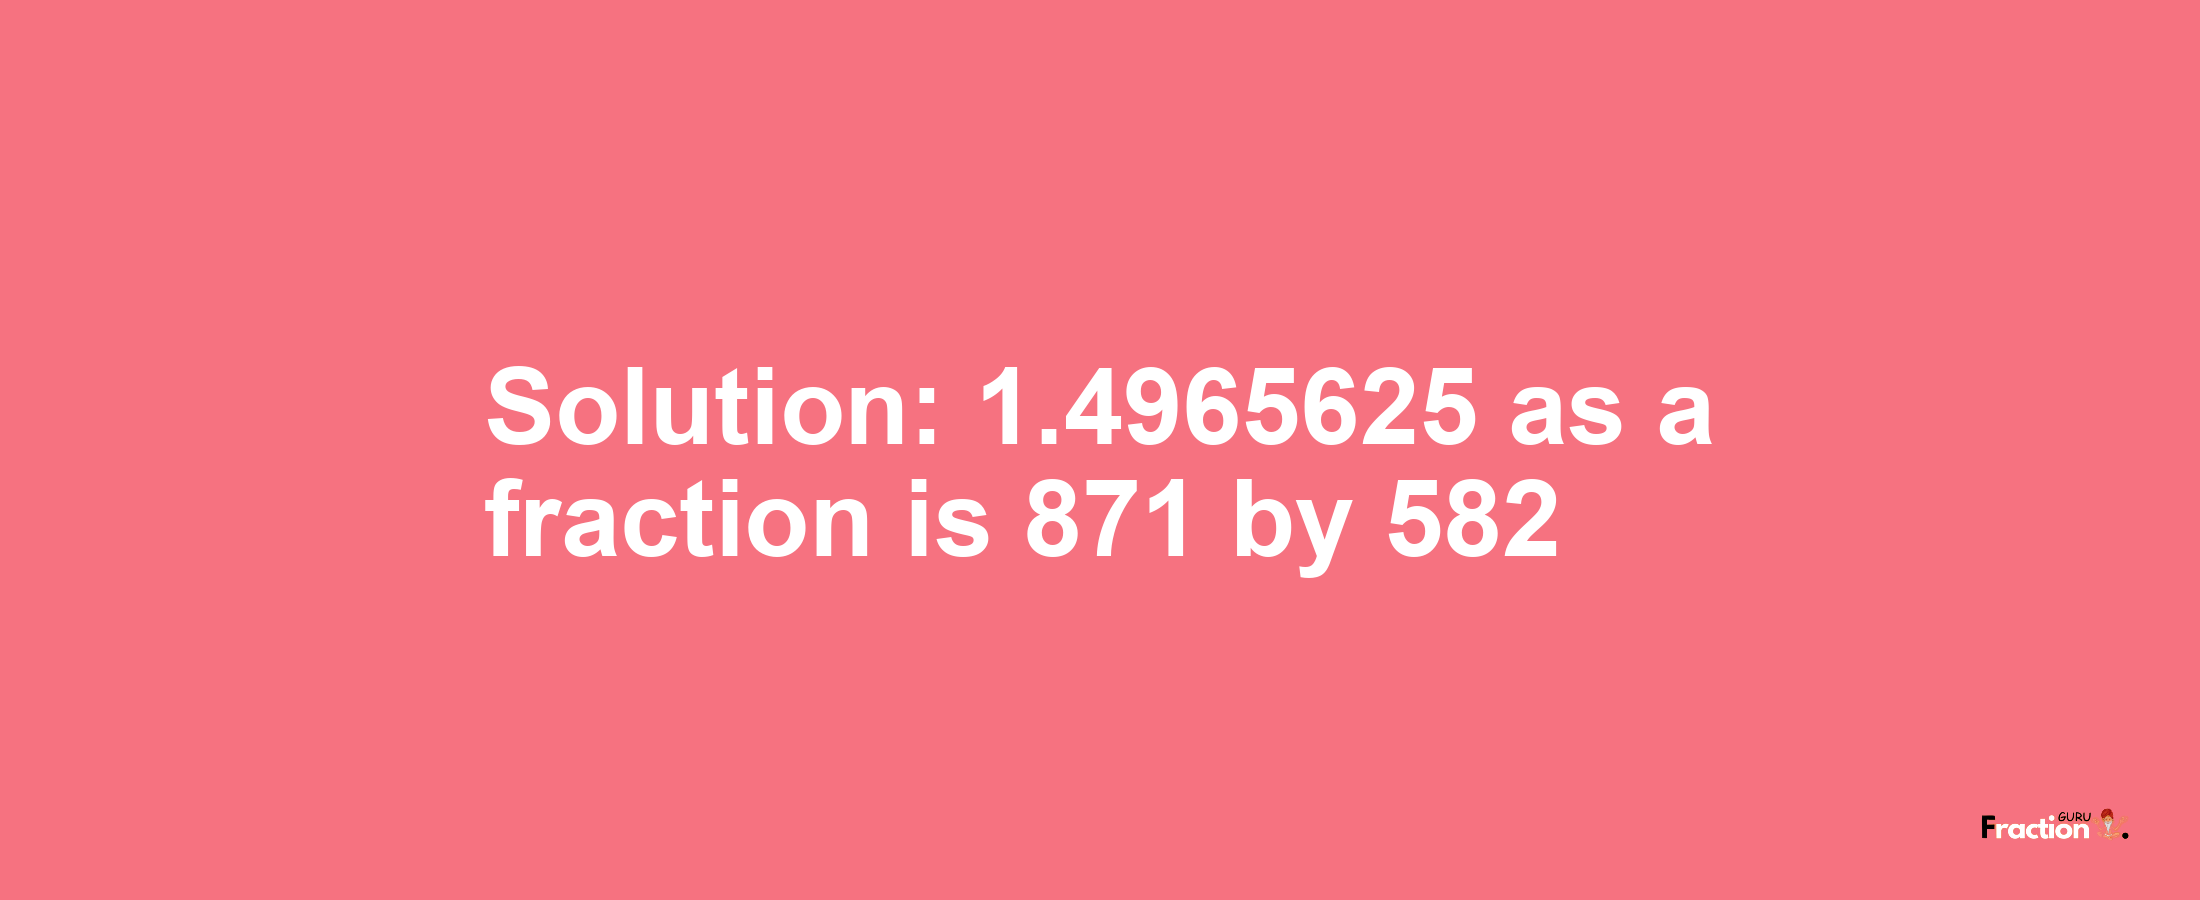 Solution:1.4965625 as a fraction is 871/582